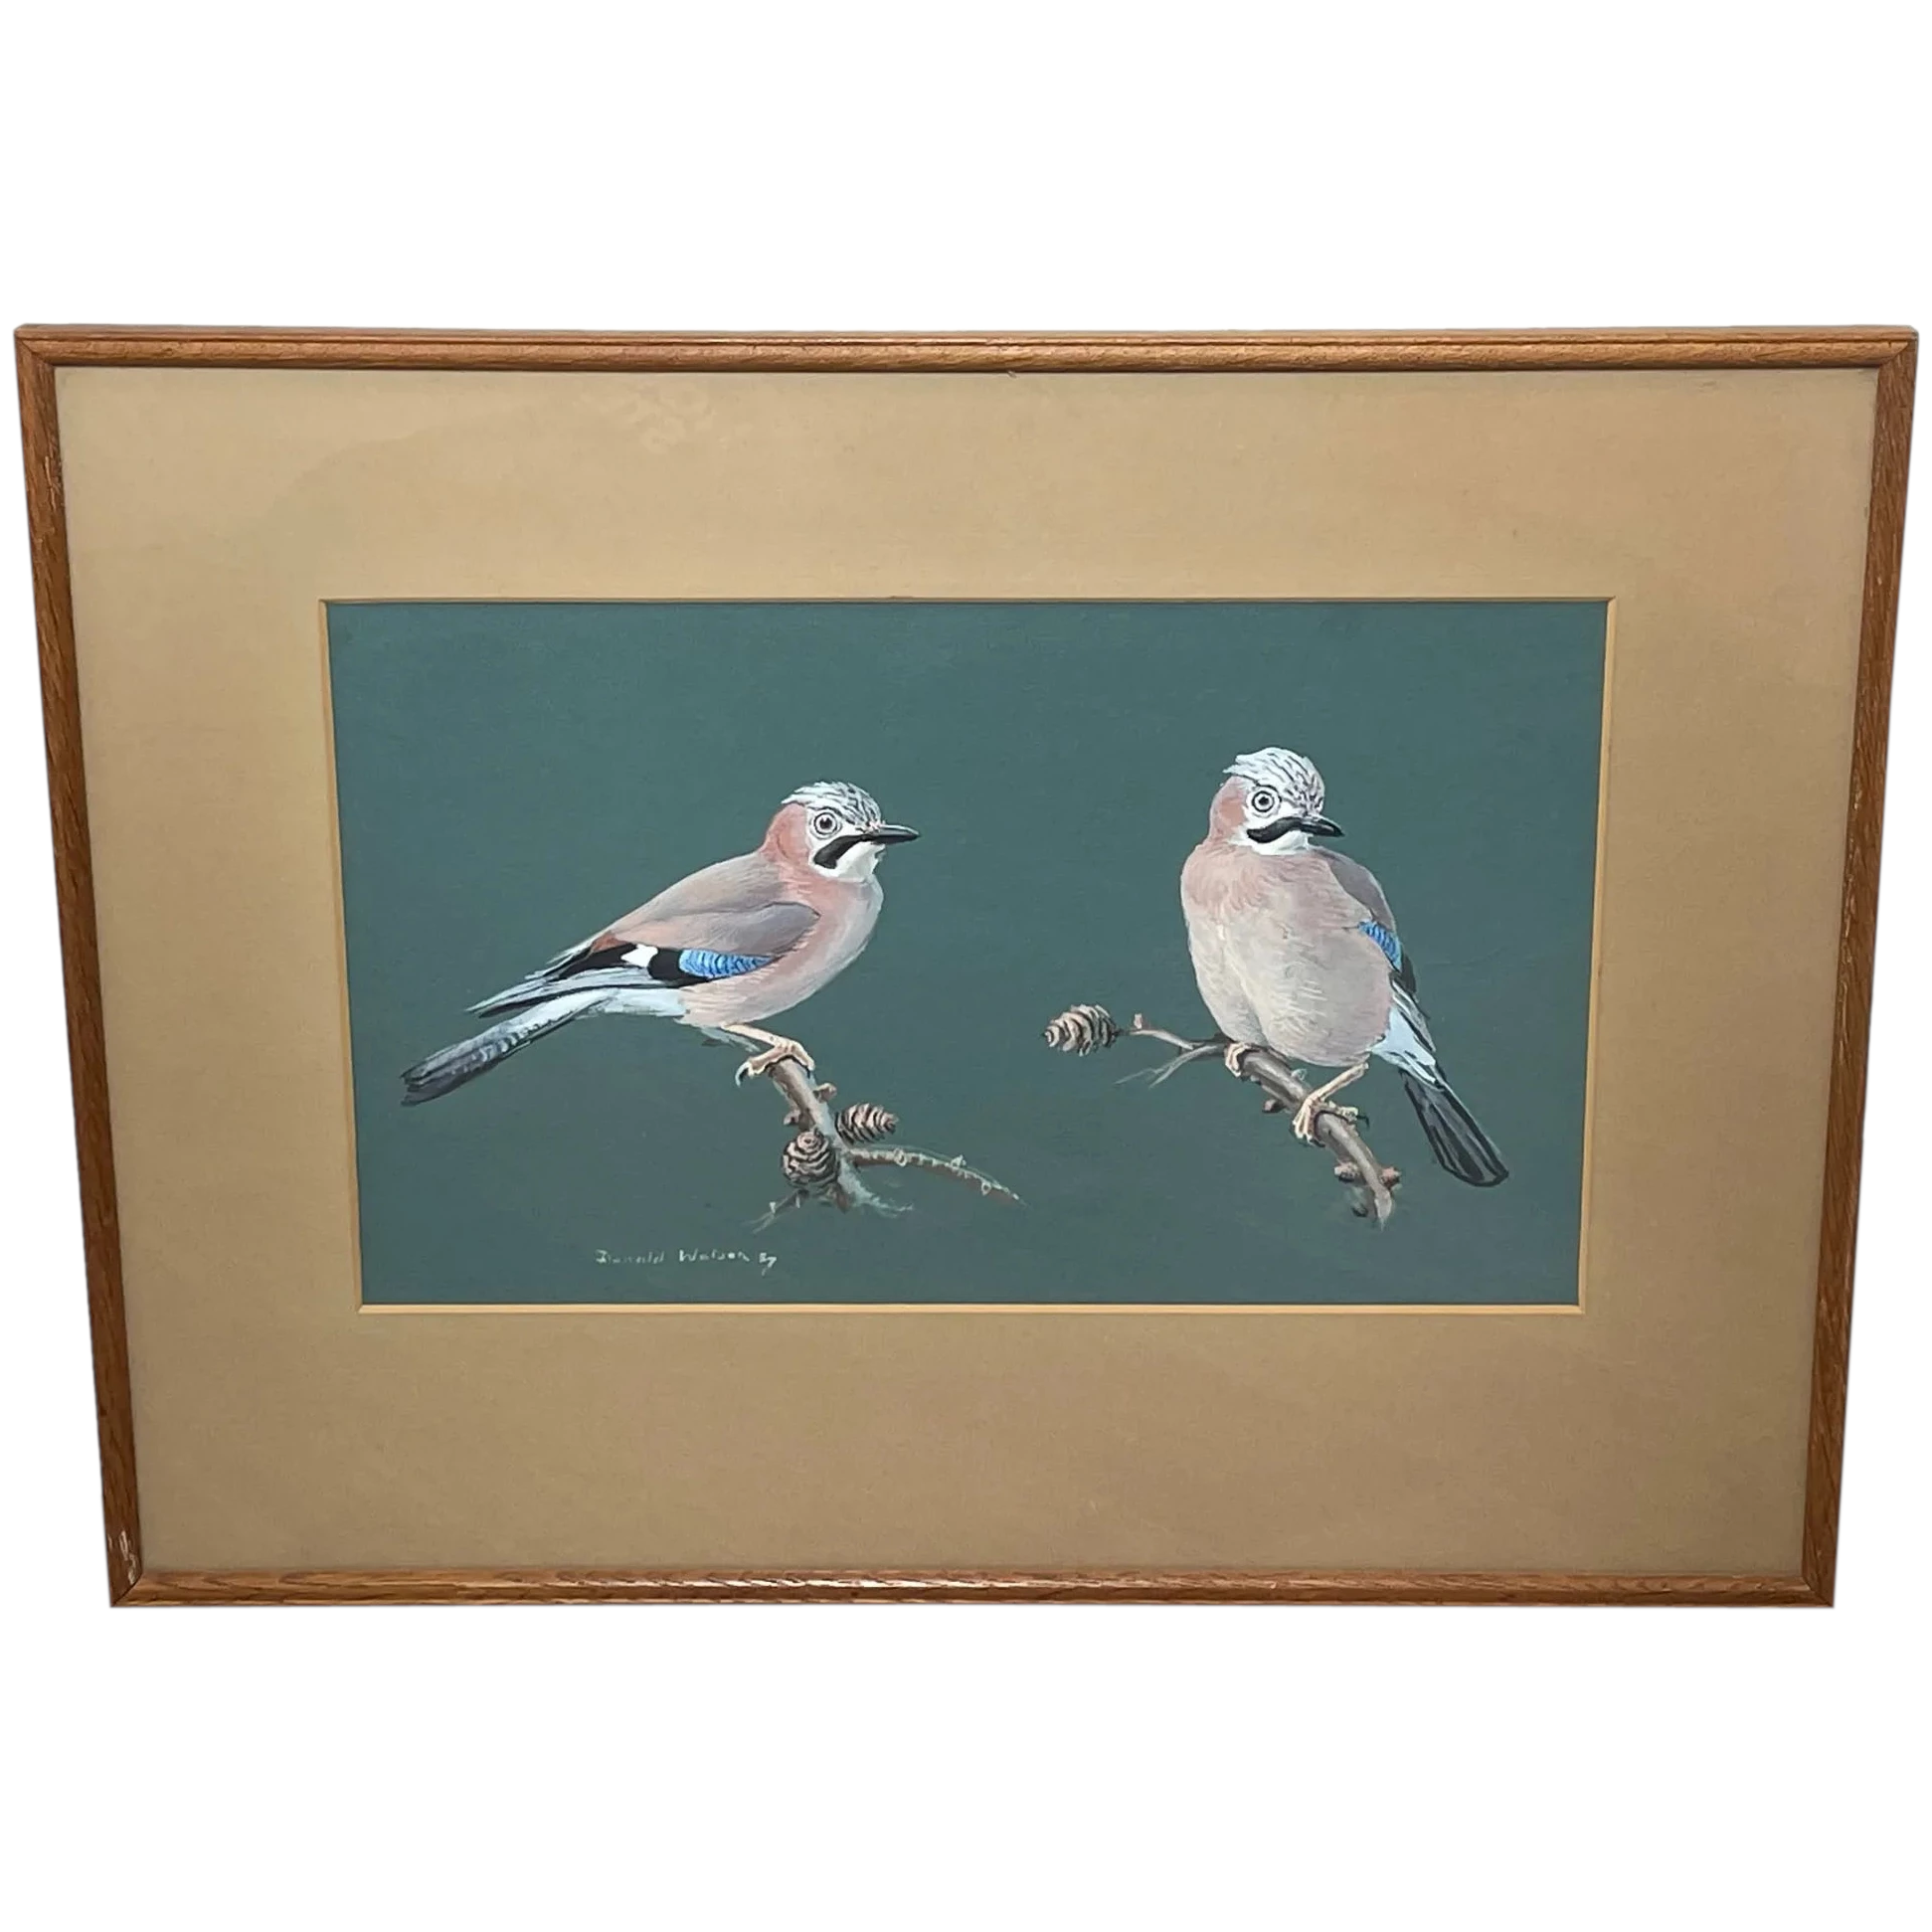 British Ornithological Painting Jays Perched Bird Study By Donald Watson - Cheshire Antiques Consultant